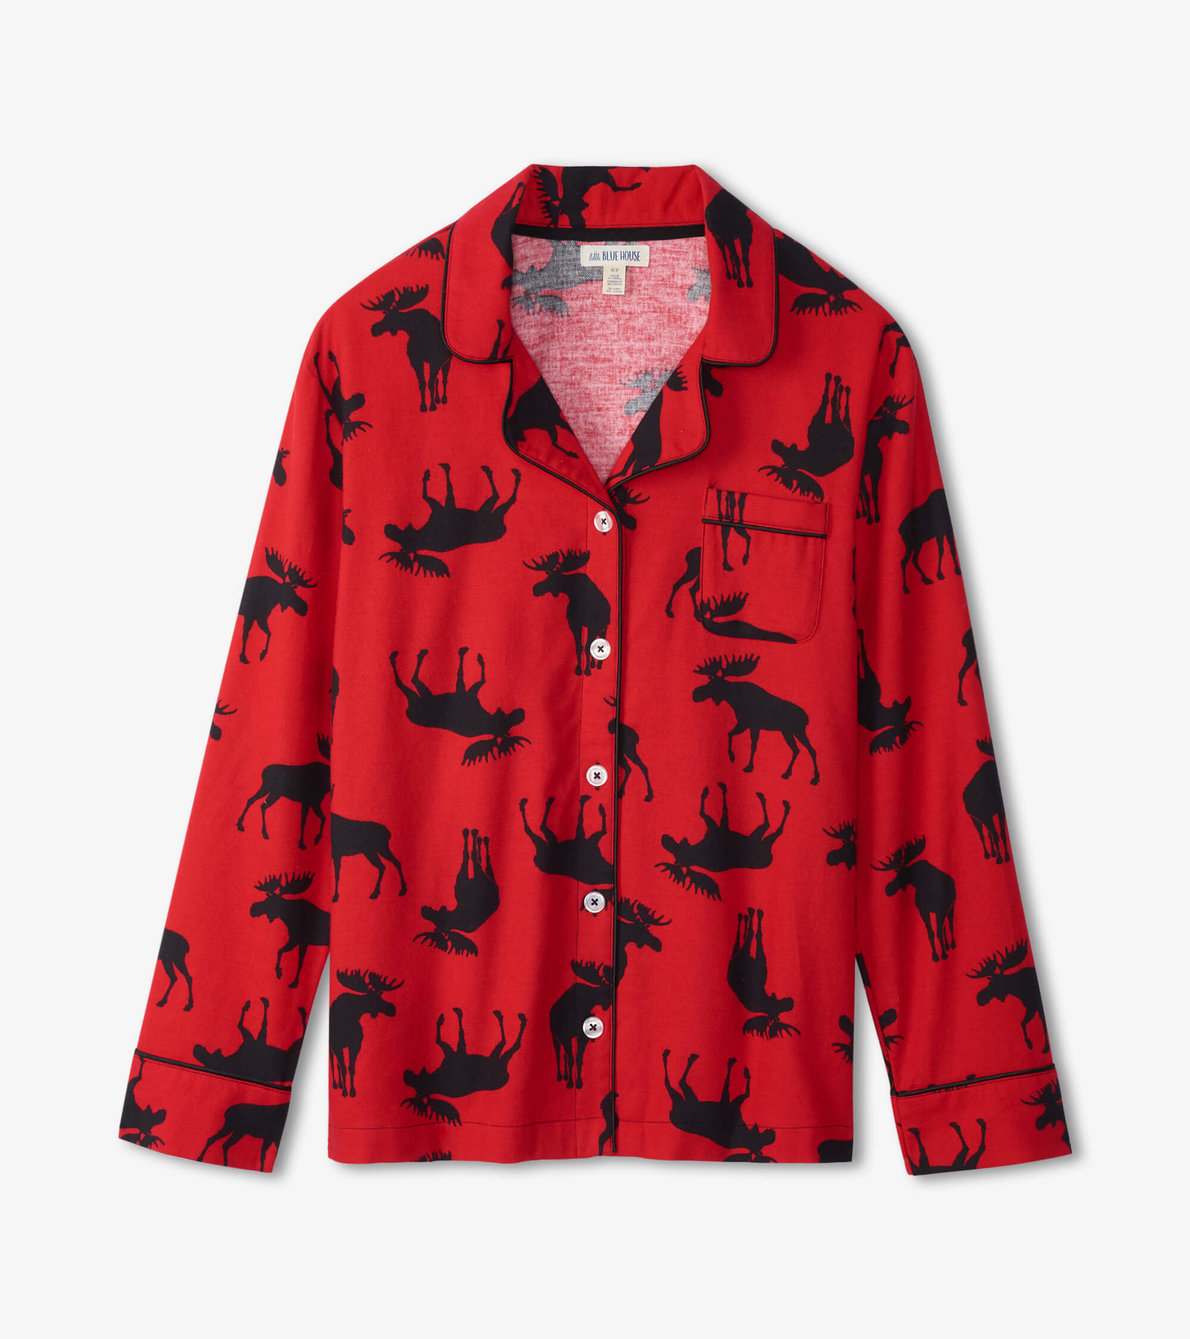 View larger image of Women's Moose On Red Flannel Pajama Set